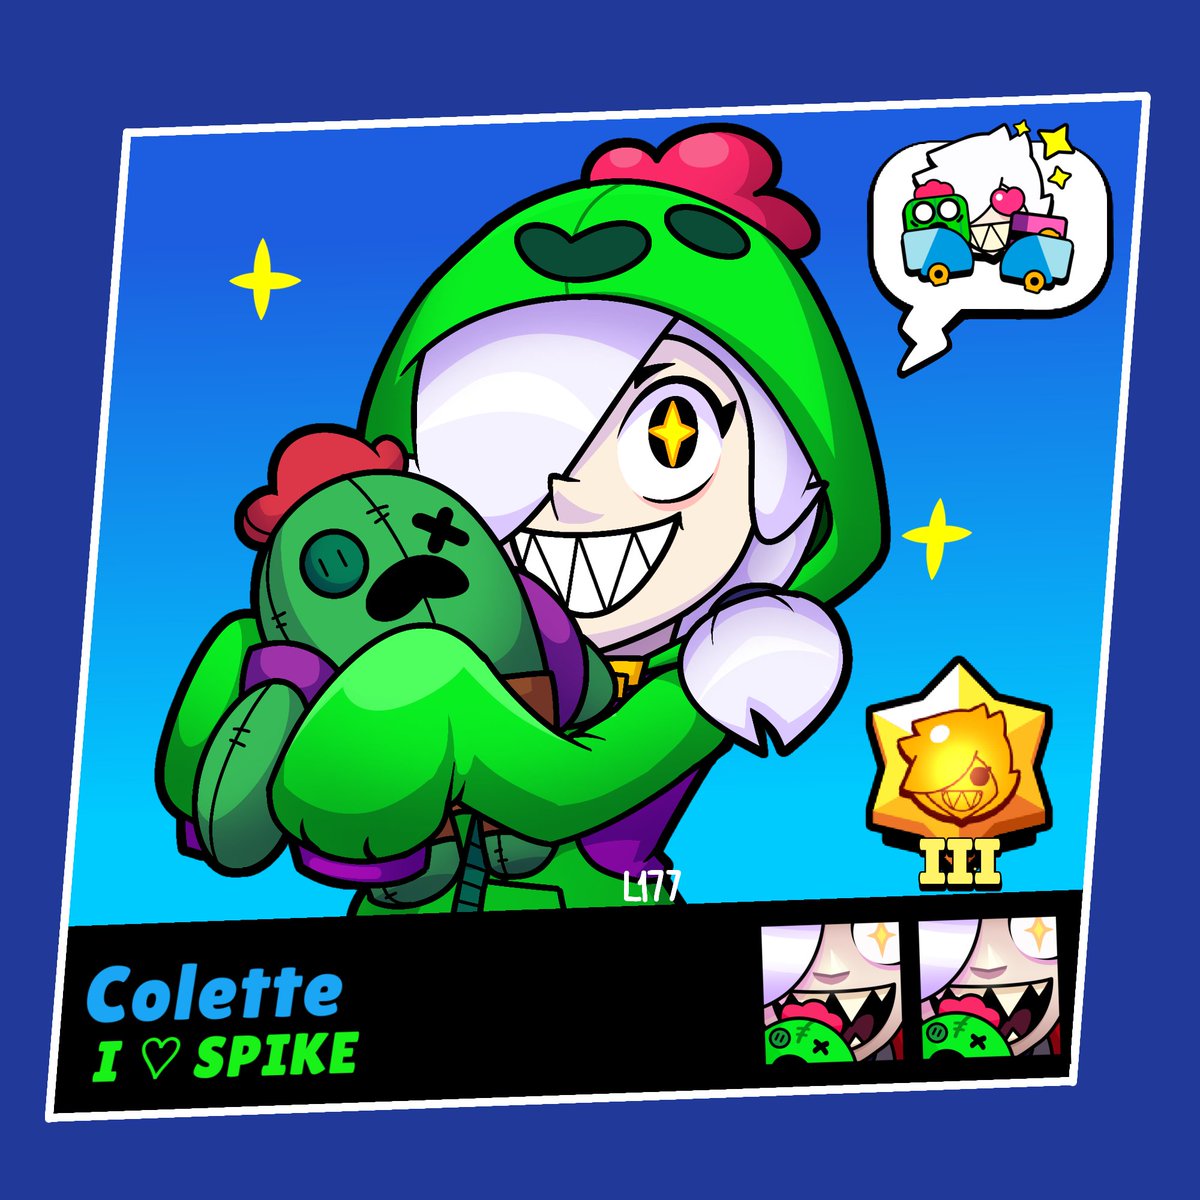 We need Colette with a Spike plush skin in the game🌵

#BrawlStars